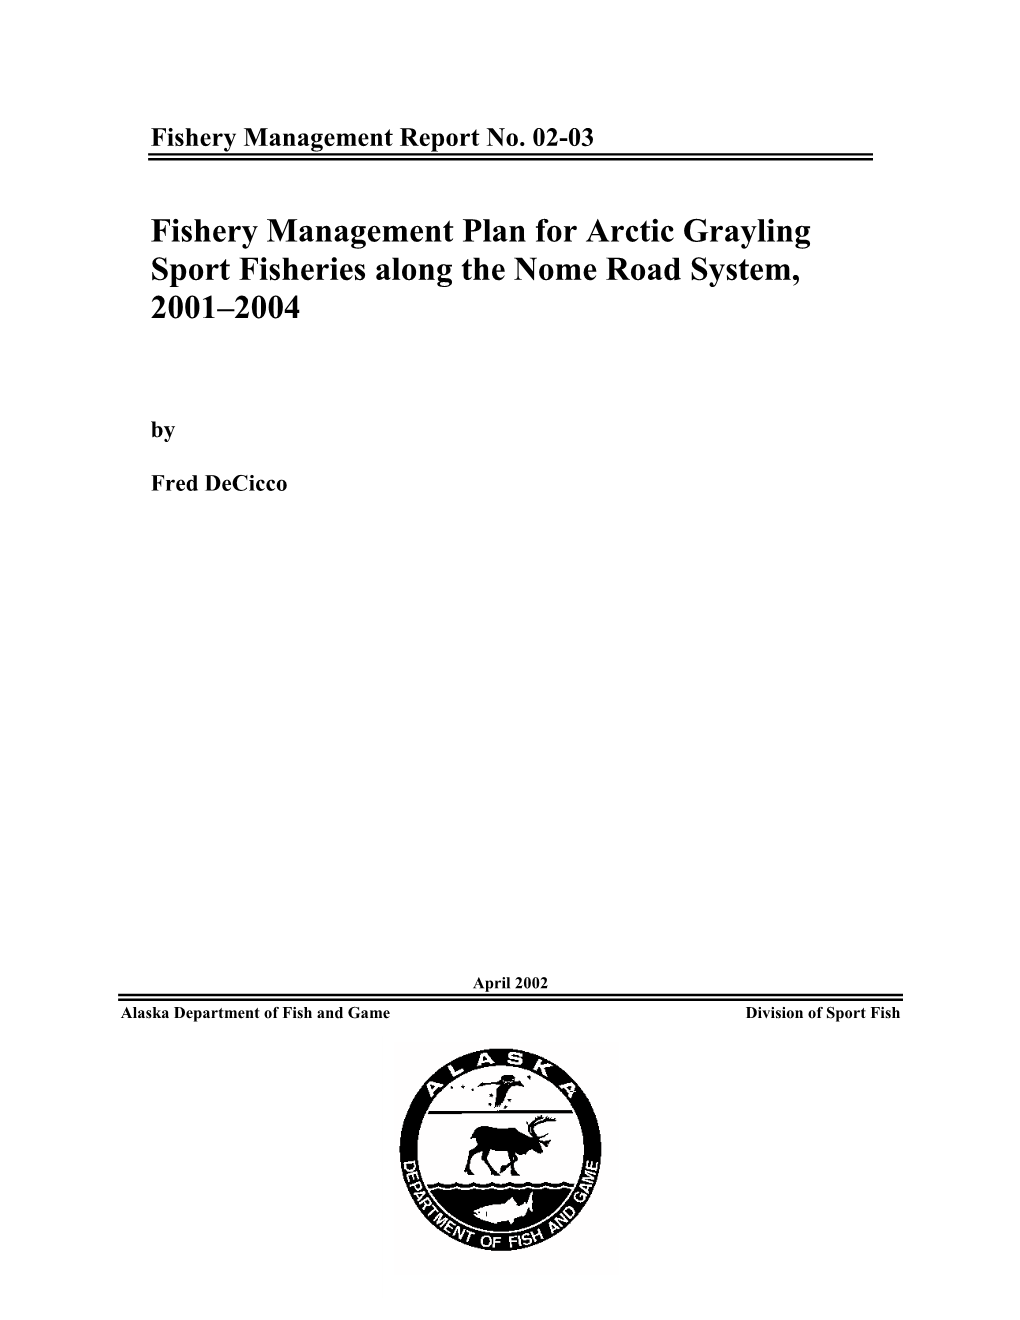 Fishery Management Plan for Arctic Grayling Sport Fisheries Along the Nome Road System, 2001–2004